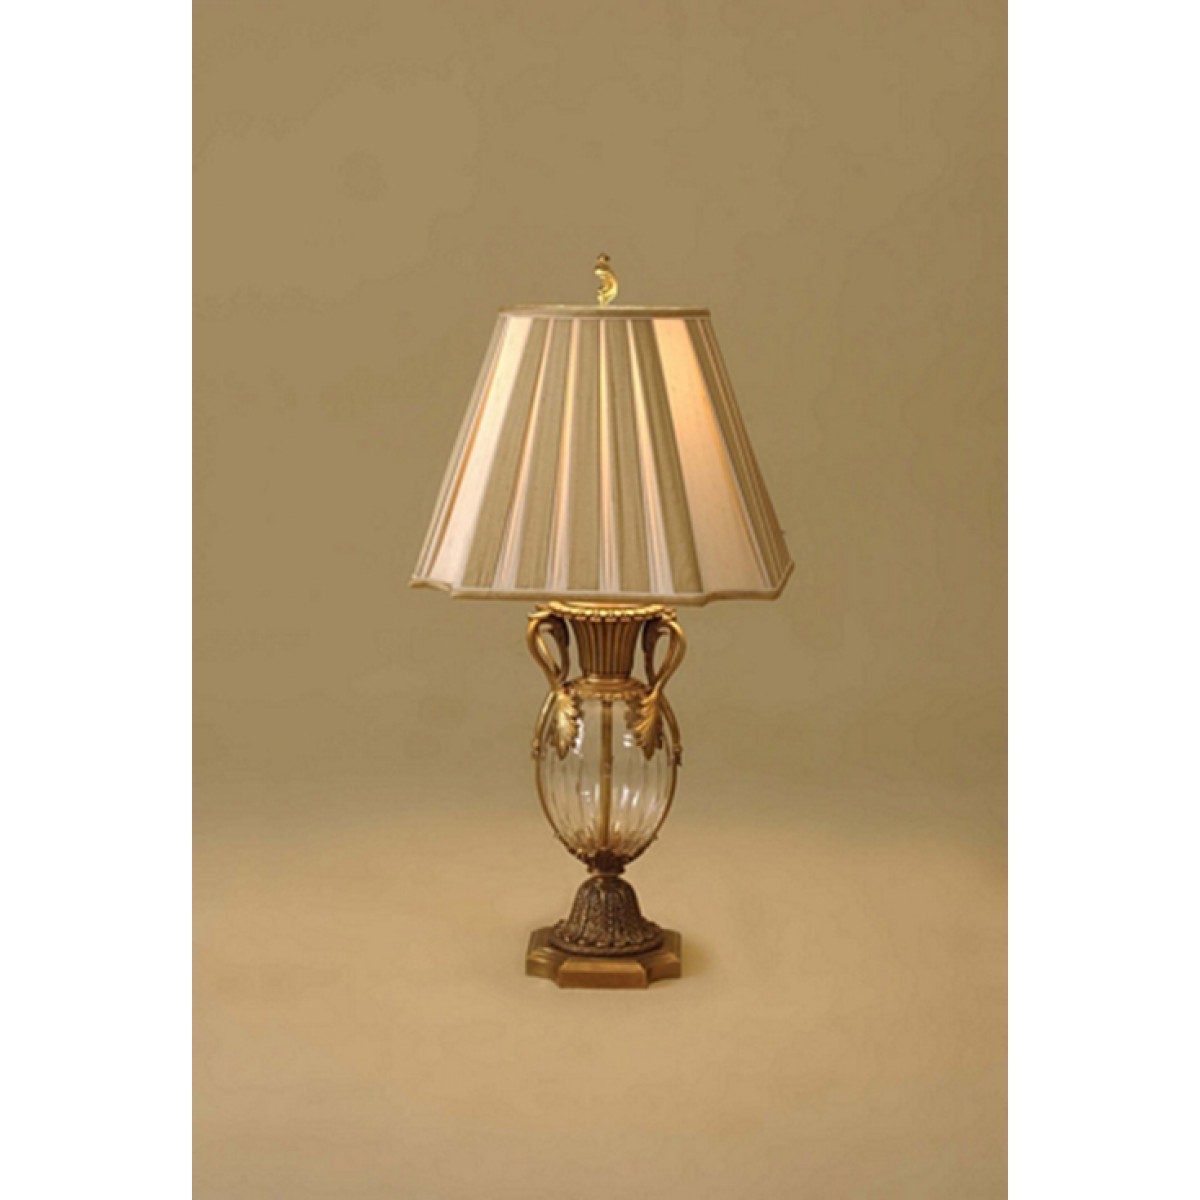 maitland smith decorative crystal urn table lamp antique brass accent accents pleated silk shade vintage side white wicker with glass top marble carpet dividers rustic farmhouse